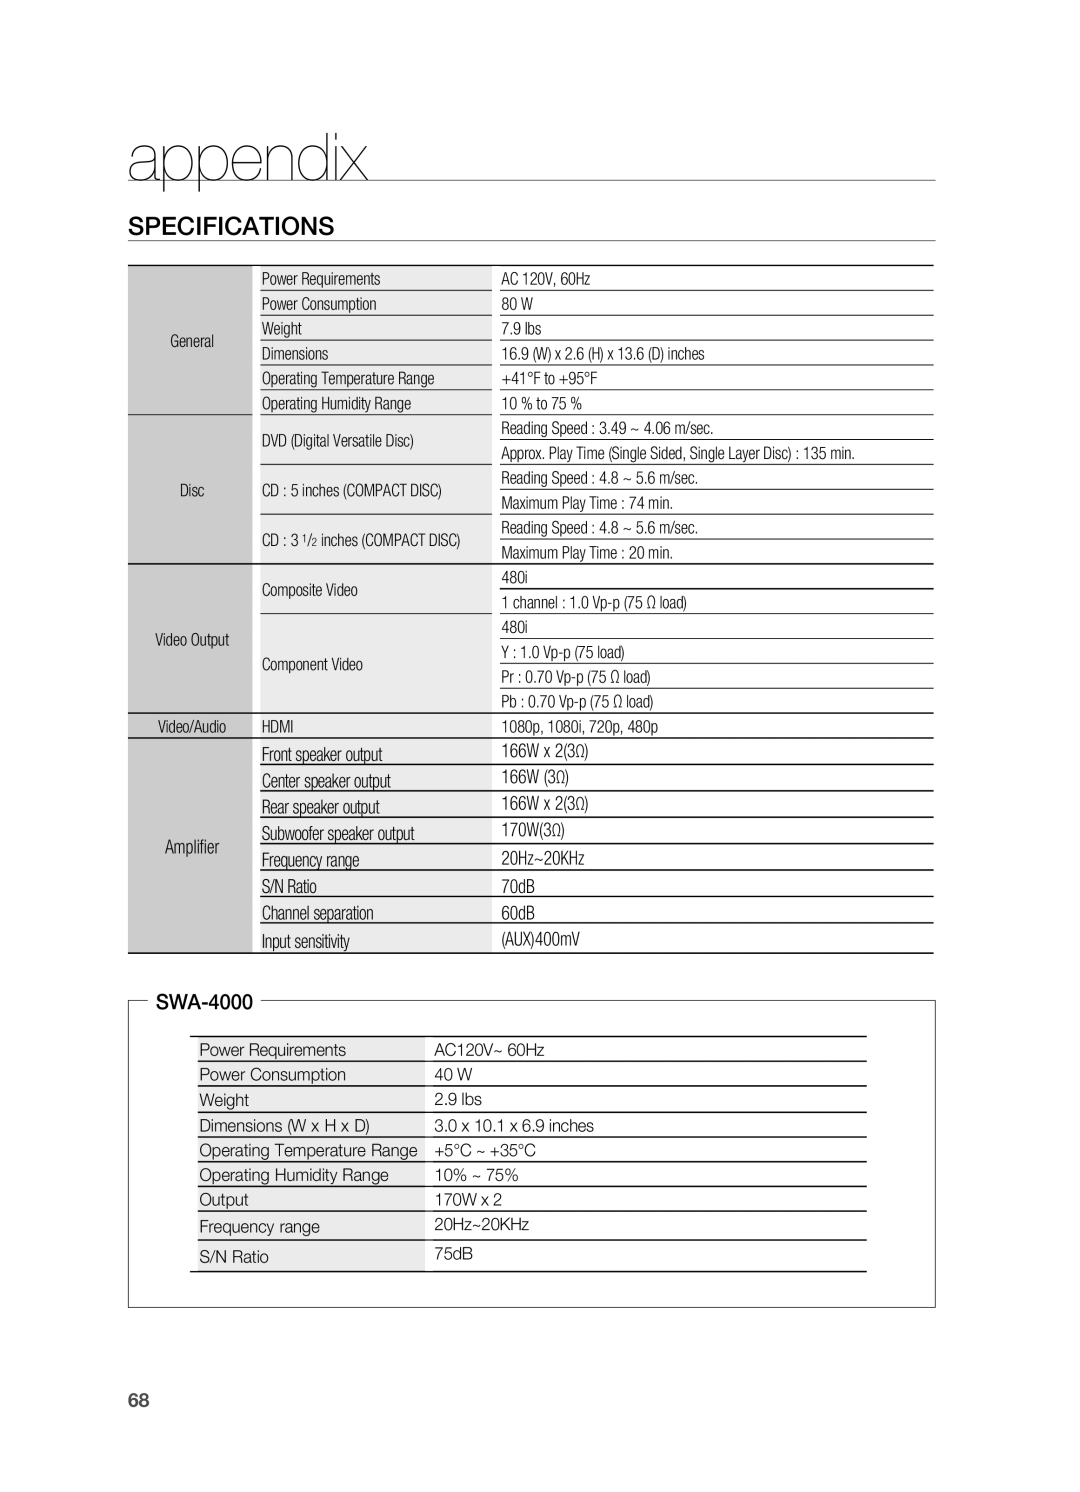 Samsung HT-TWZ315 manual Specifications, SWA-4000, appendix 